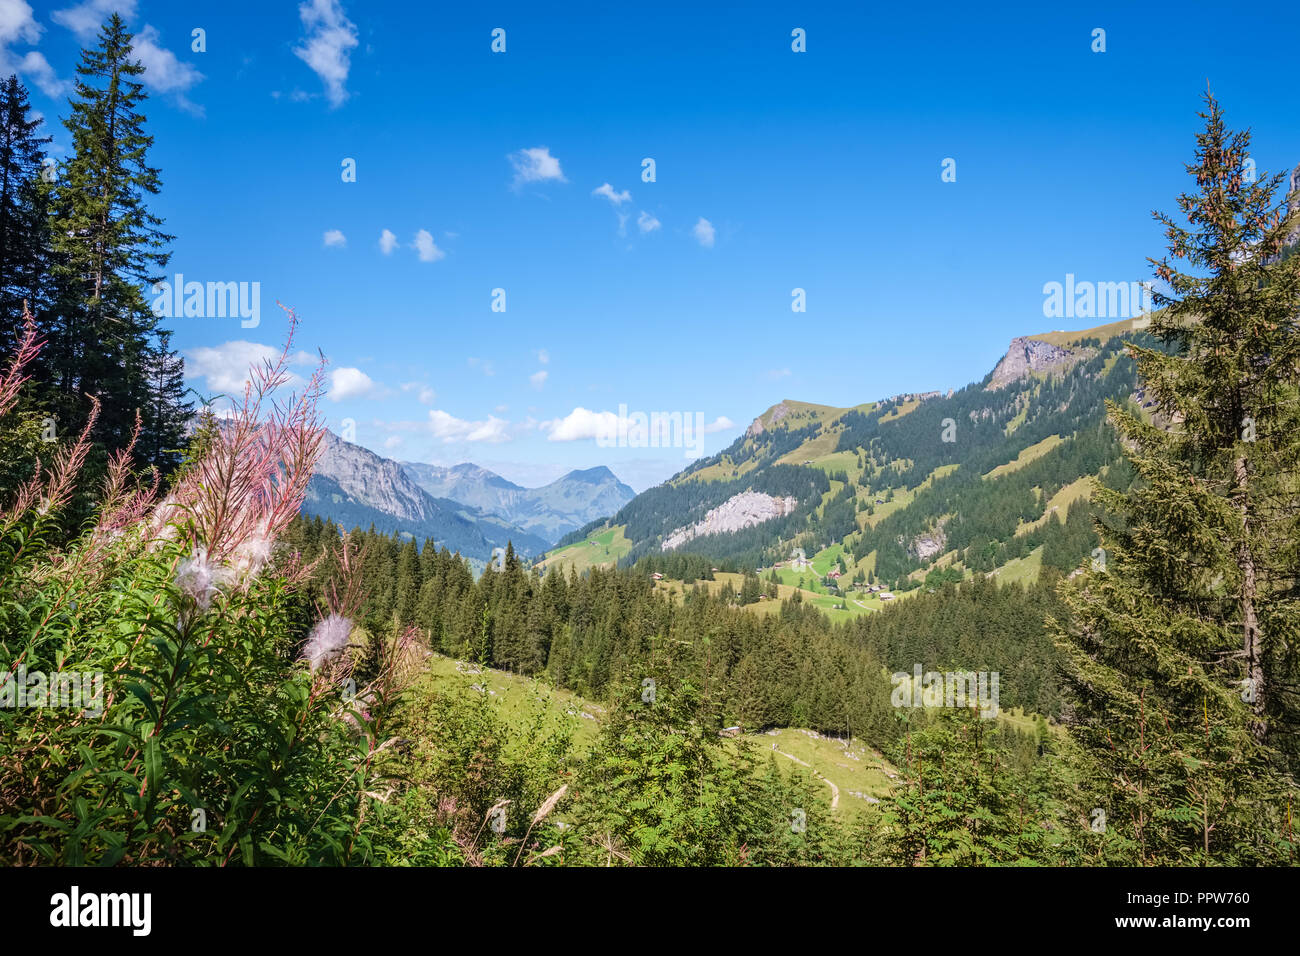 Spectacular views in Kiental while walkink from Griesalp to Obere Bundalp. Kiental is a village and valley in the Bernese Alps (Switzerland) Stock Photo